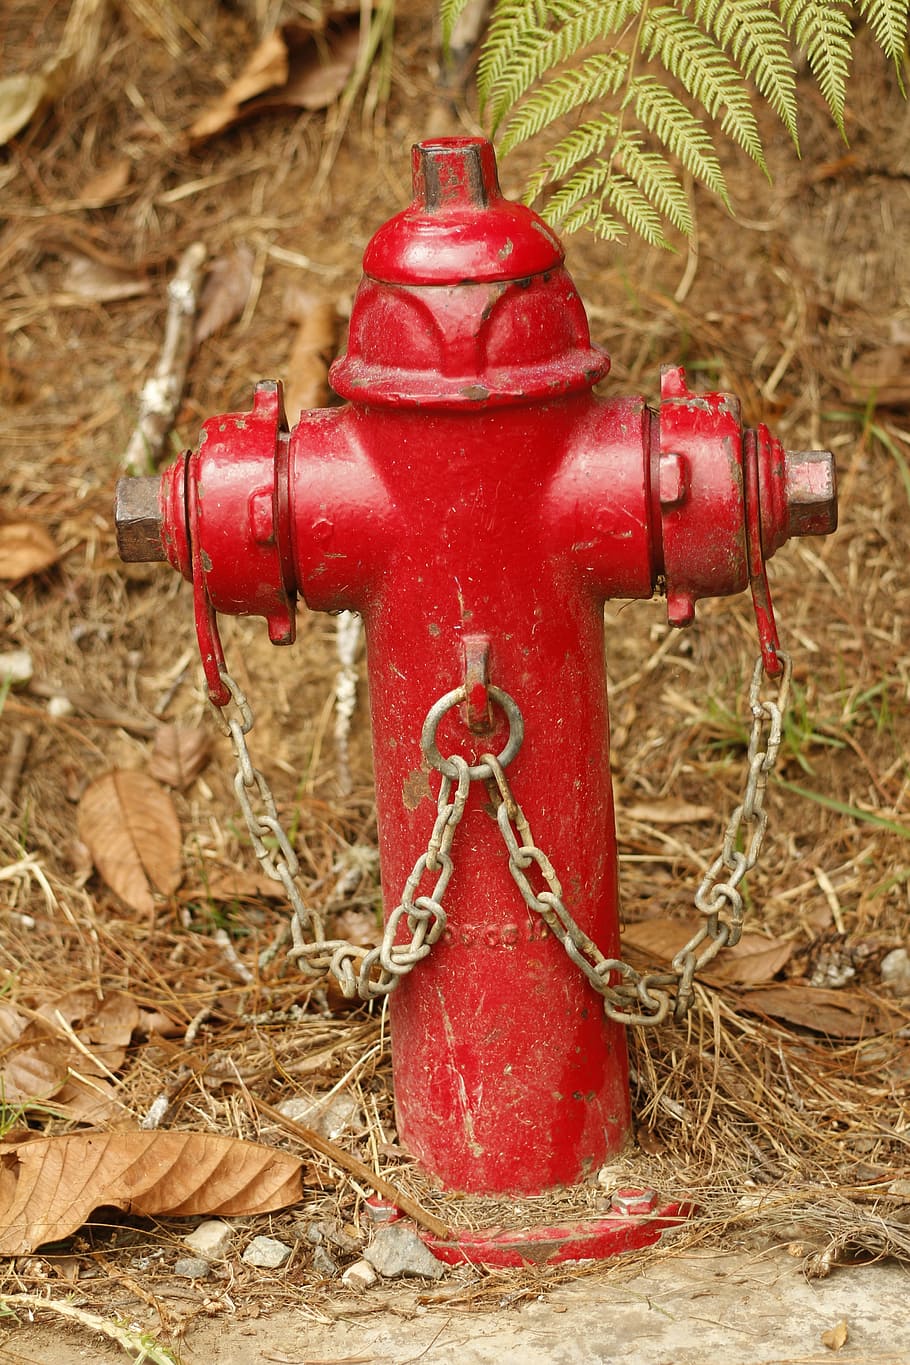 fire hydrant, water, red, firefighter, security, safety, protection, accidents and disasters, chain, emergency equipment